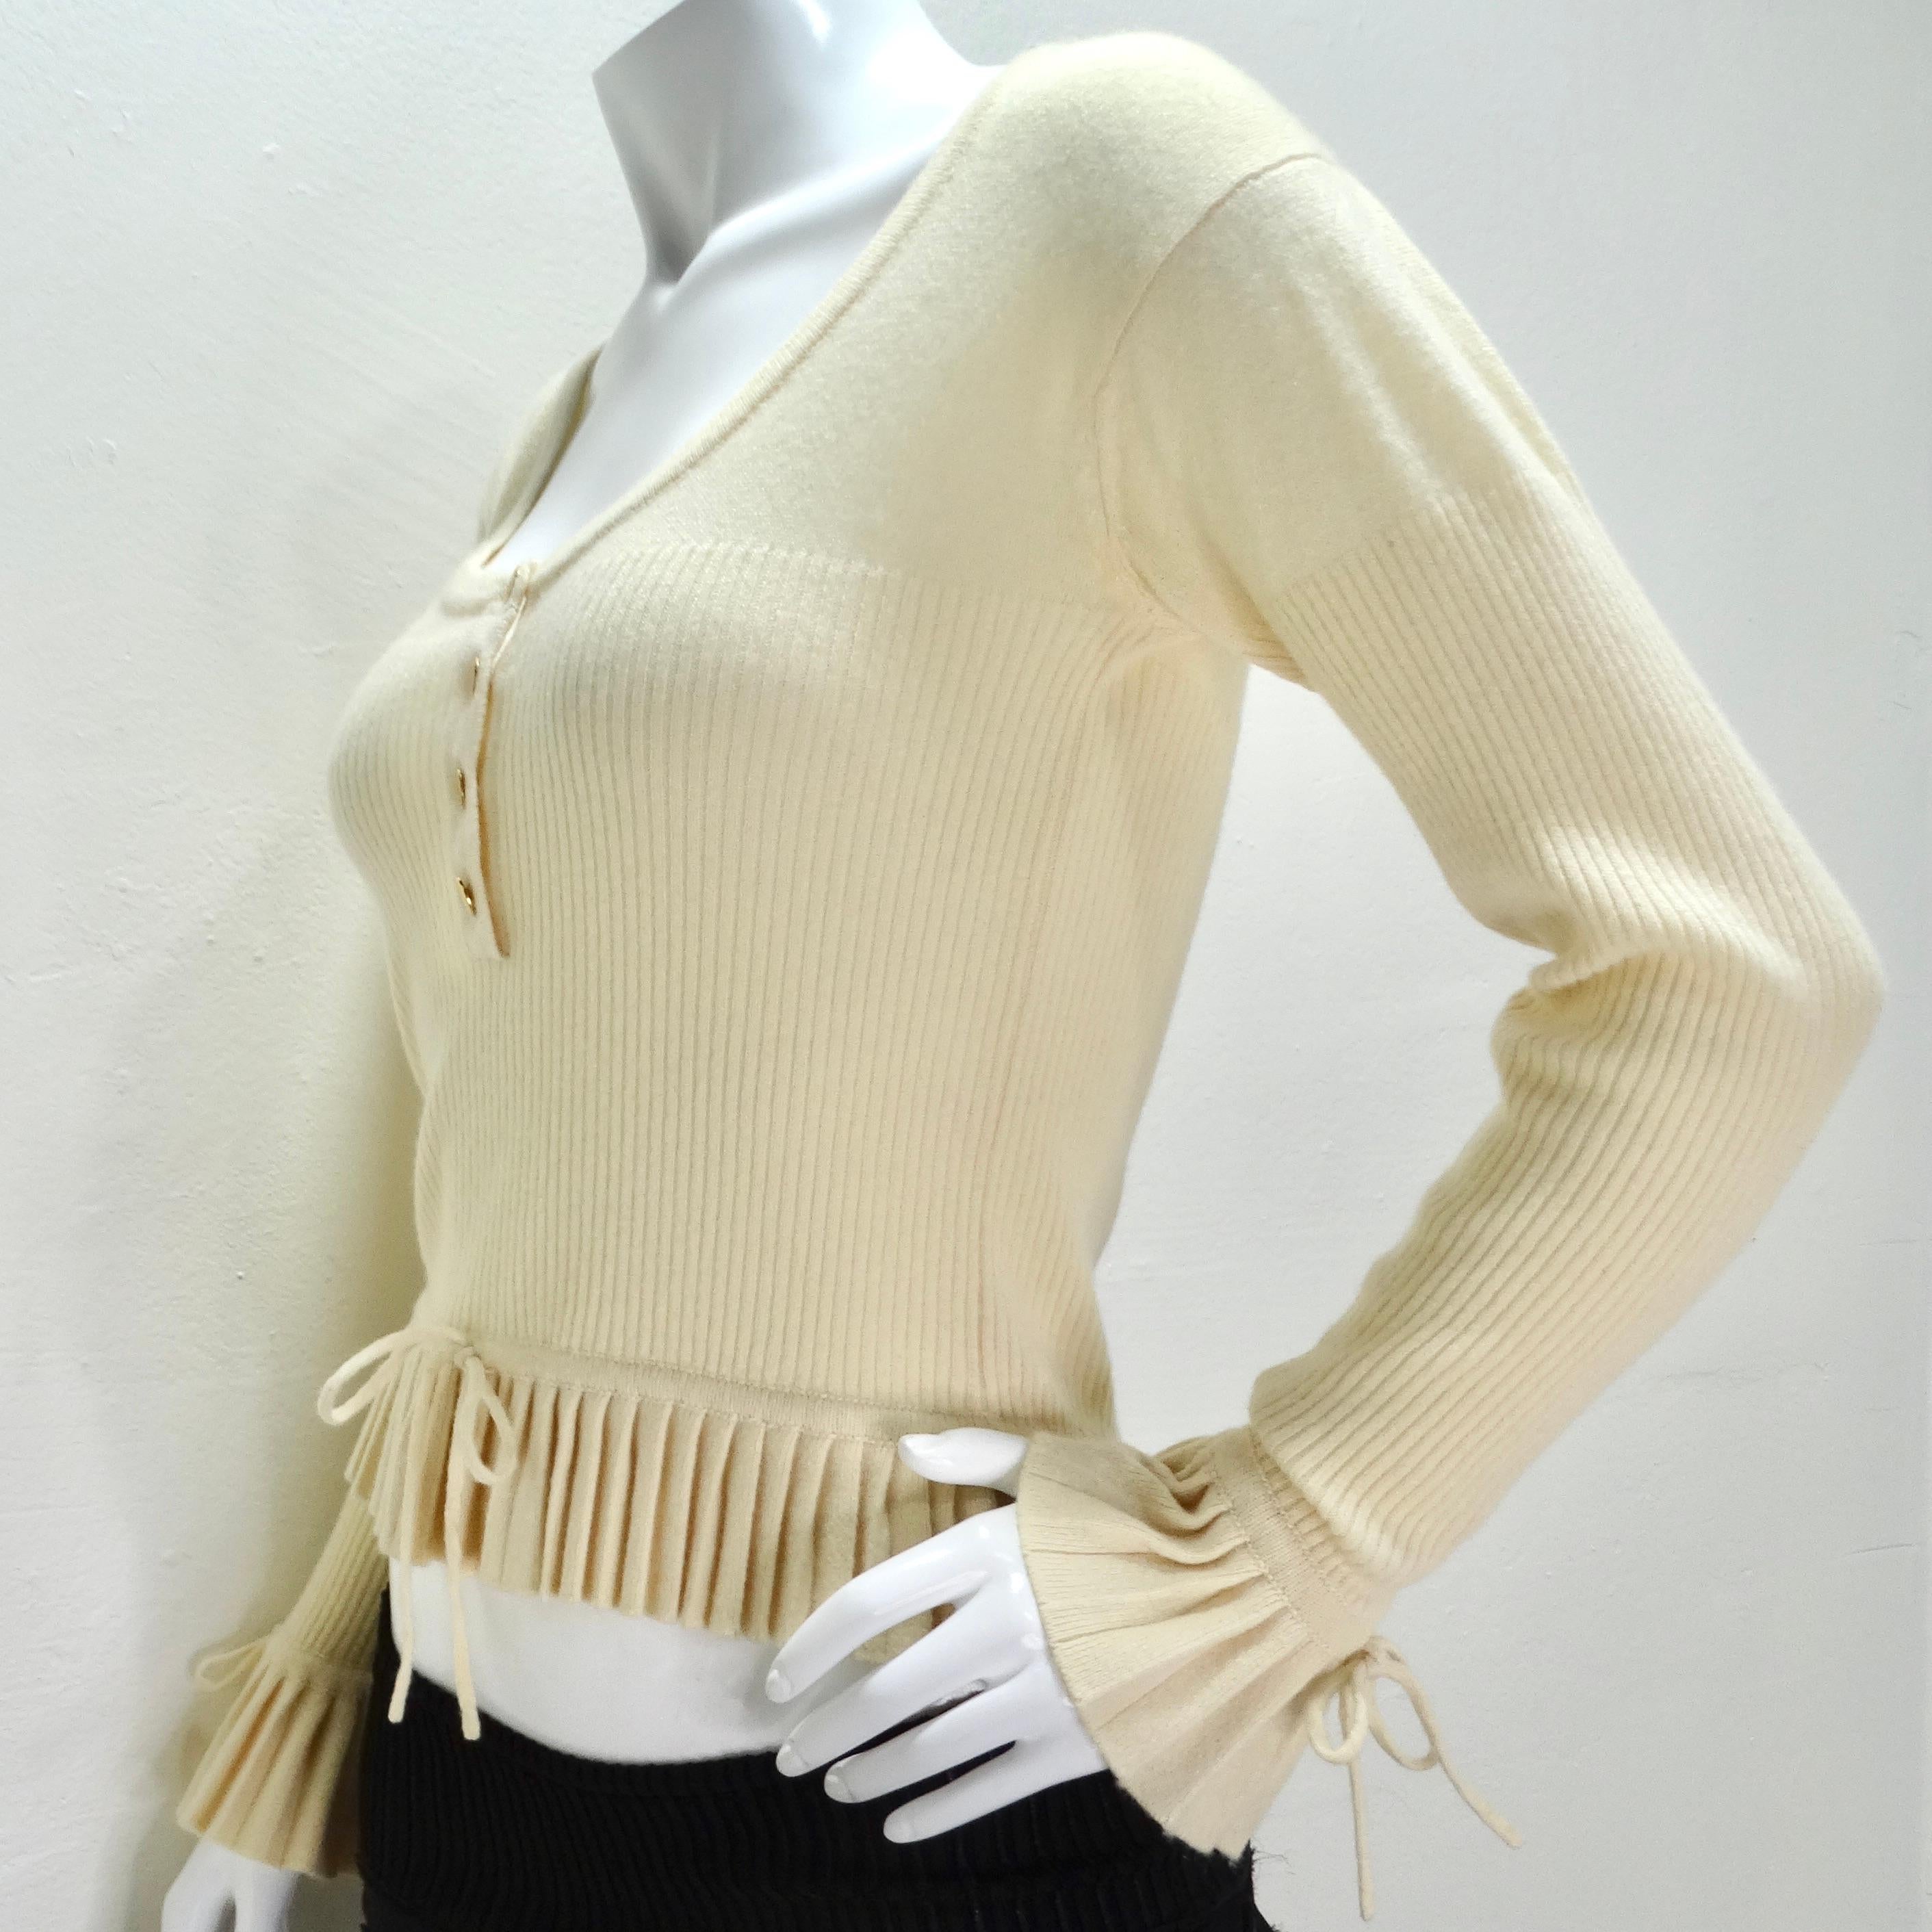 Chanel 1990s Ruffle Trim Tie Knit Cashmere Sweater  For Sale 7